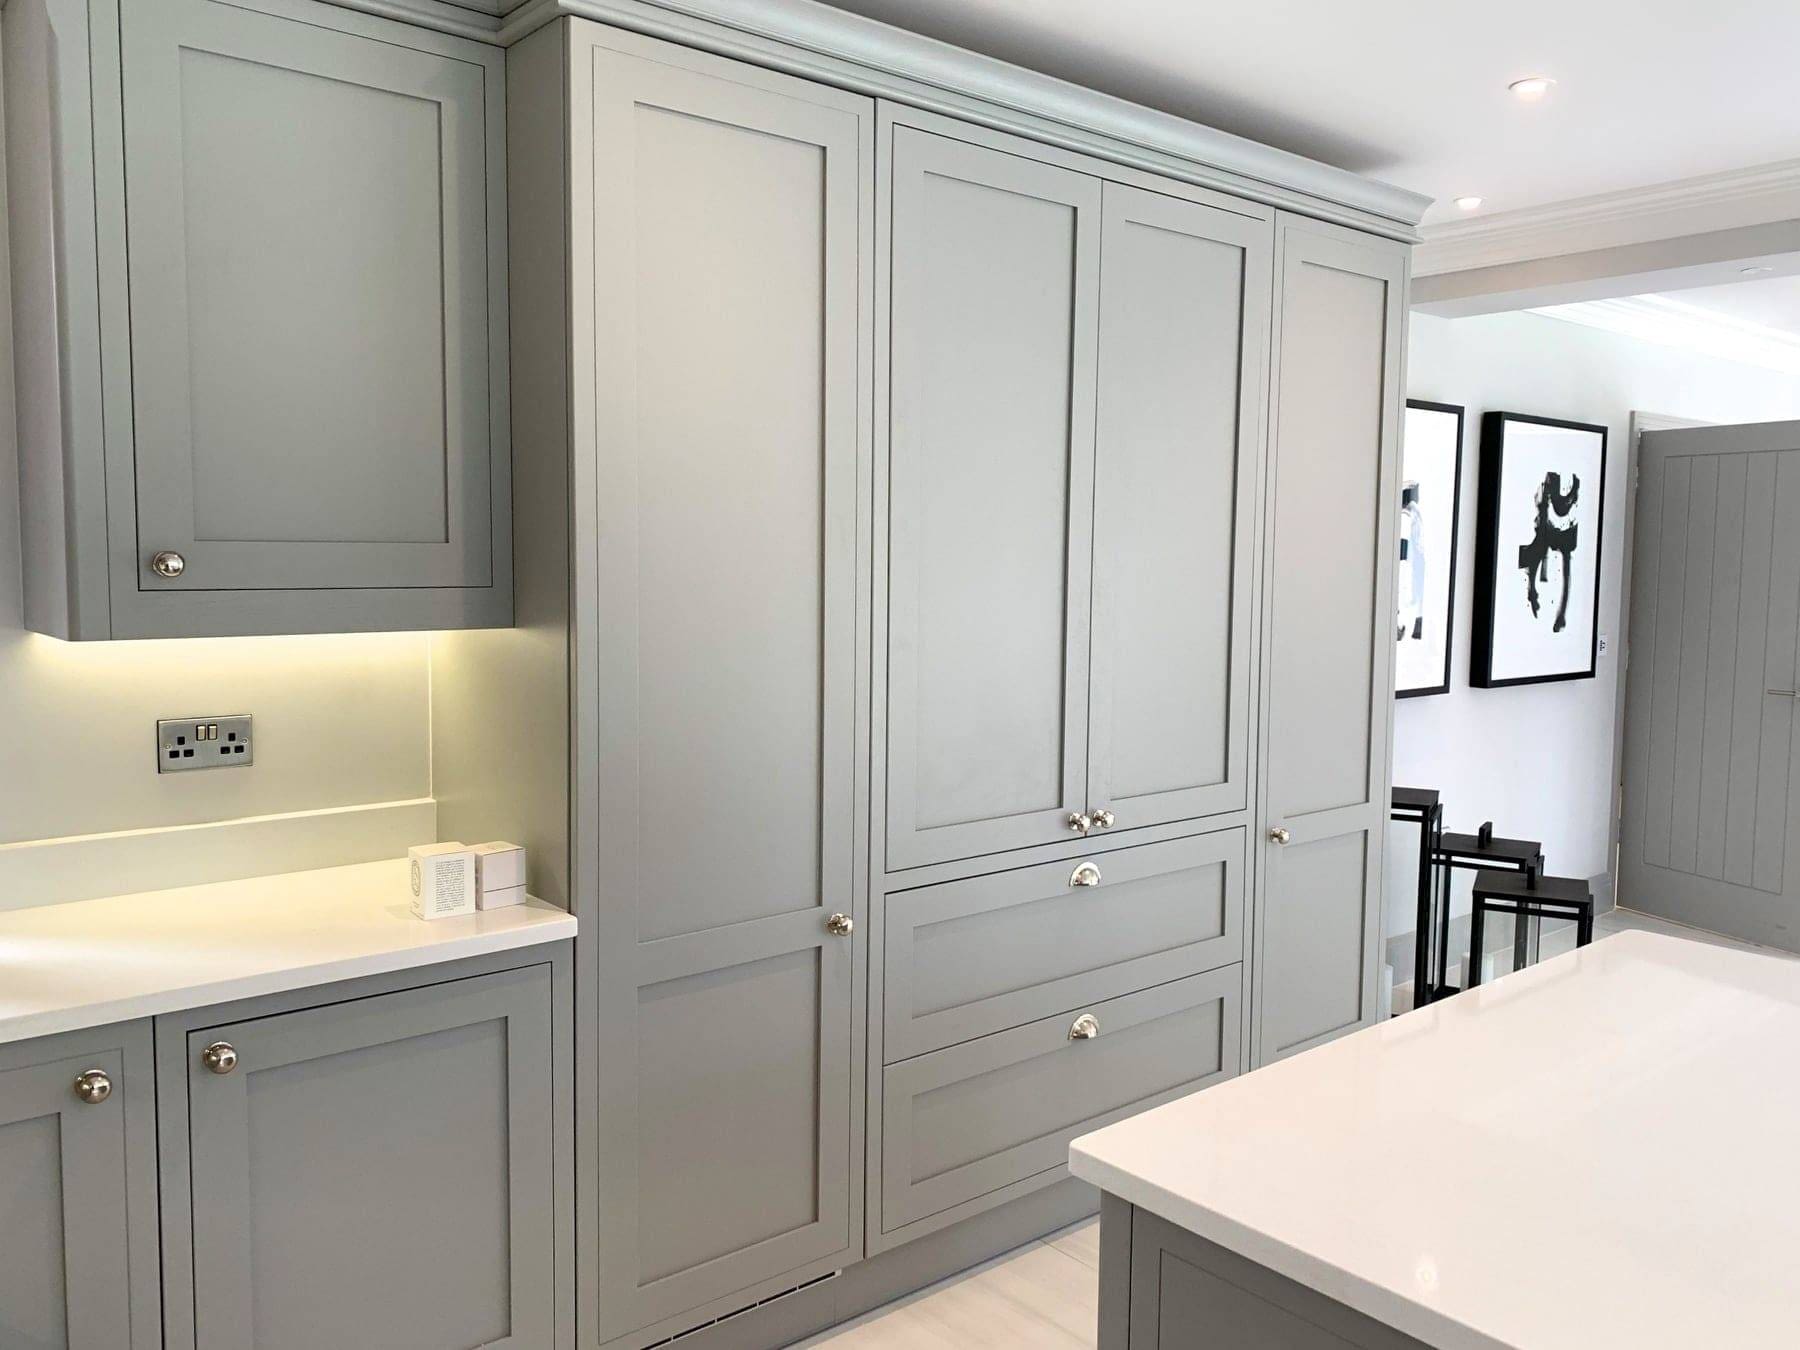 Feature Packed Contemporary Kitchen Egger Monochrome 1379 | Utopia Kitchens, Crowthorne